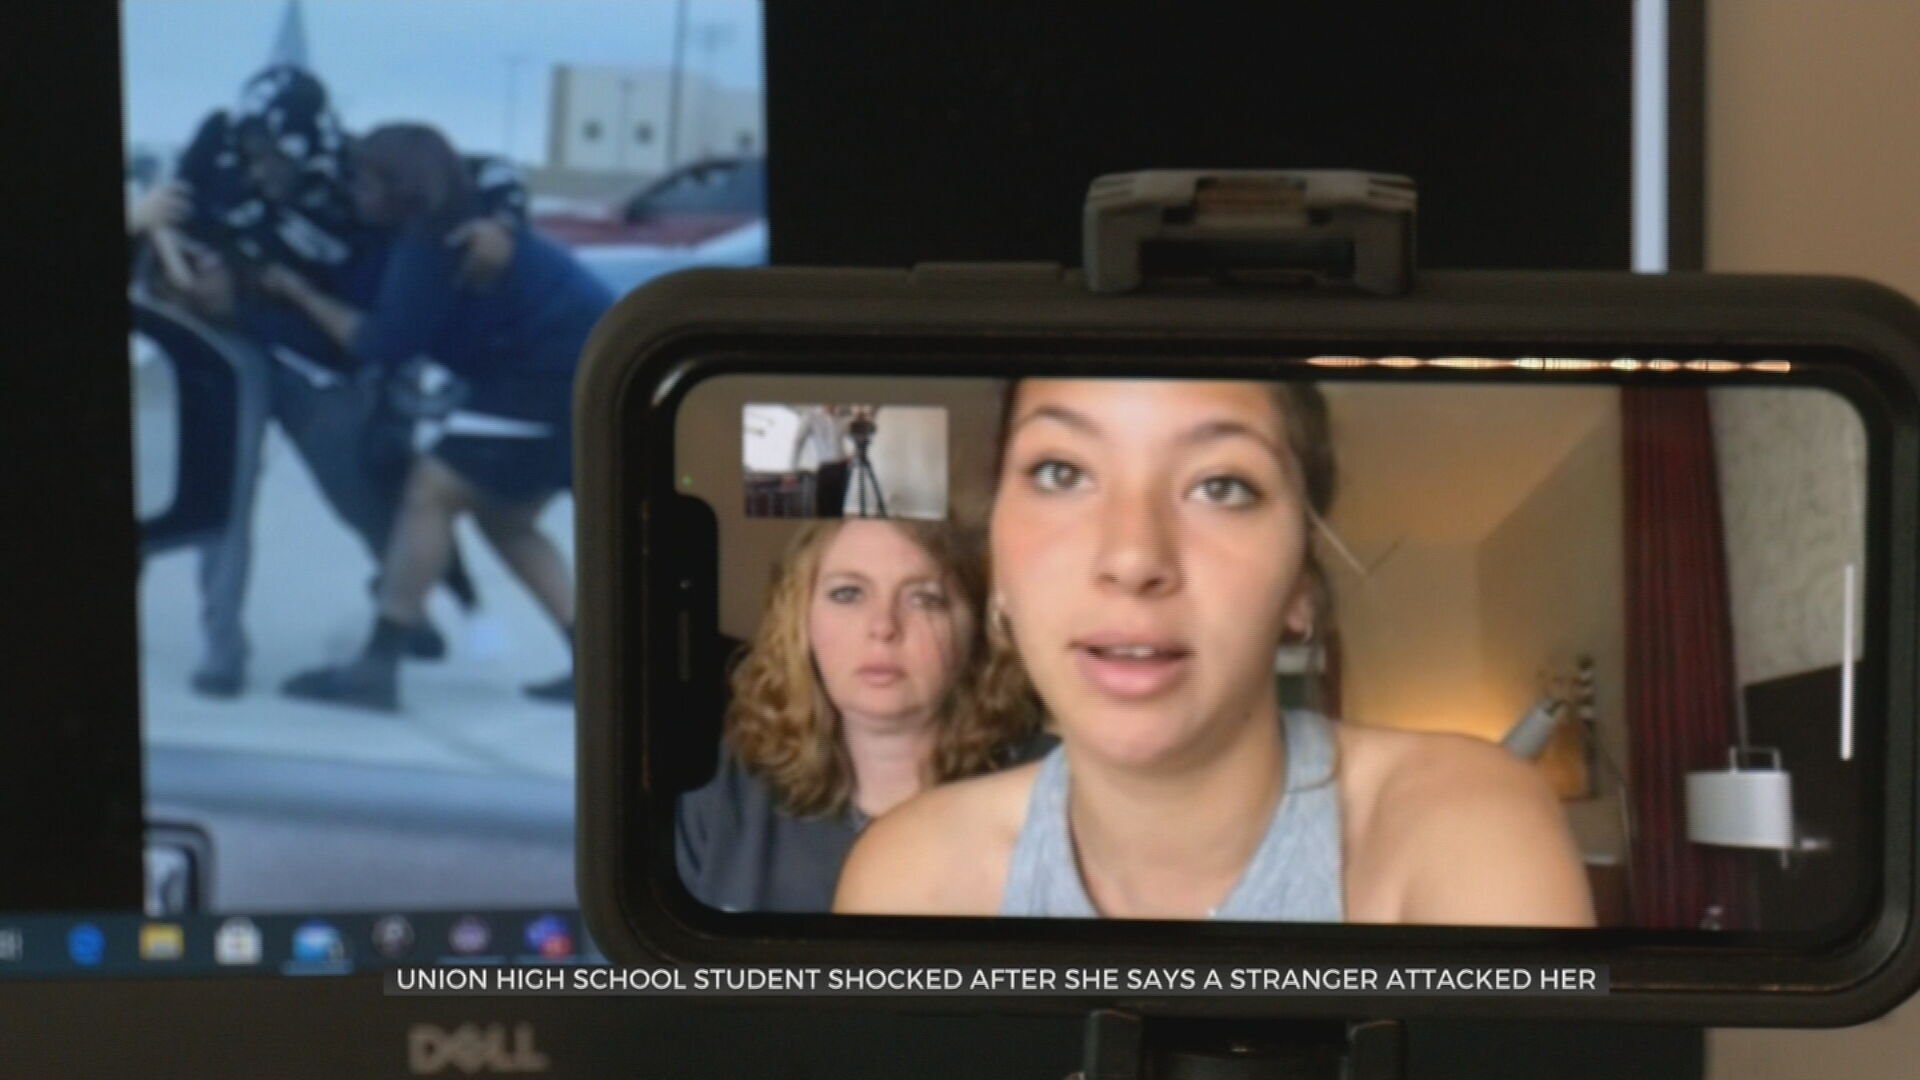 Union High School Student Shocked After She Says Stranger Assaulted, Threatened Her 